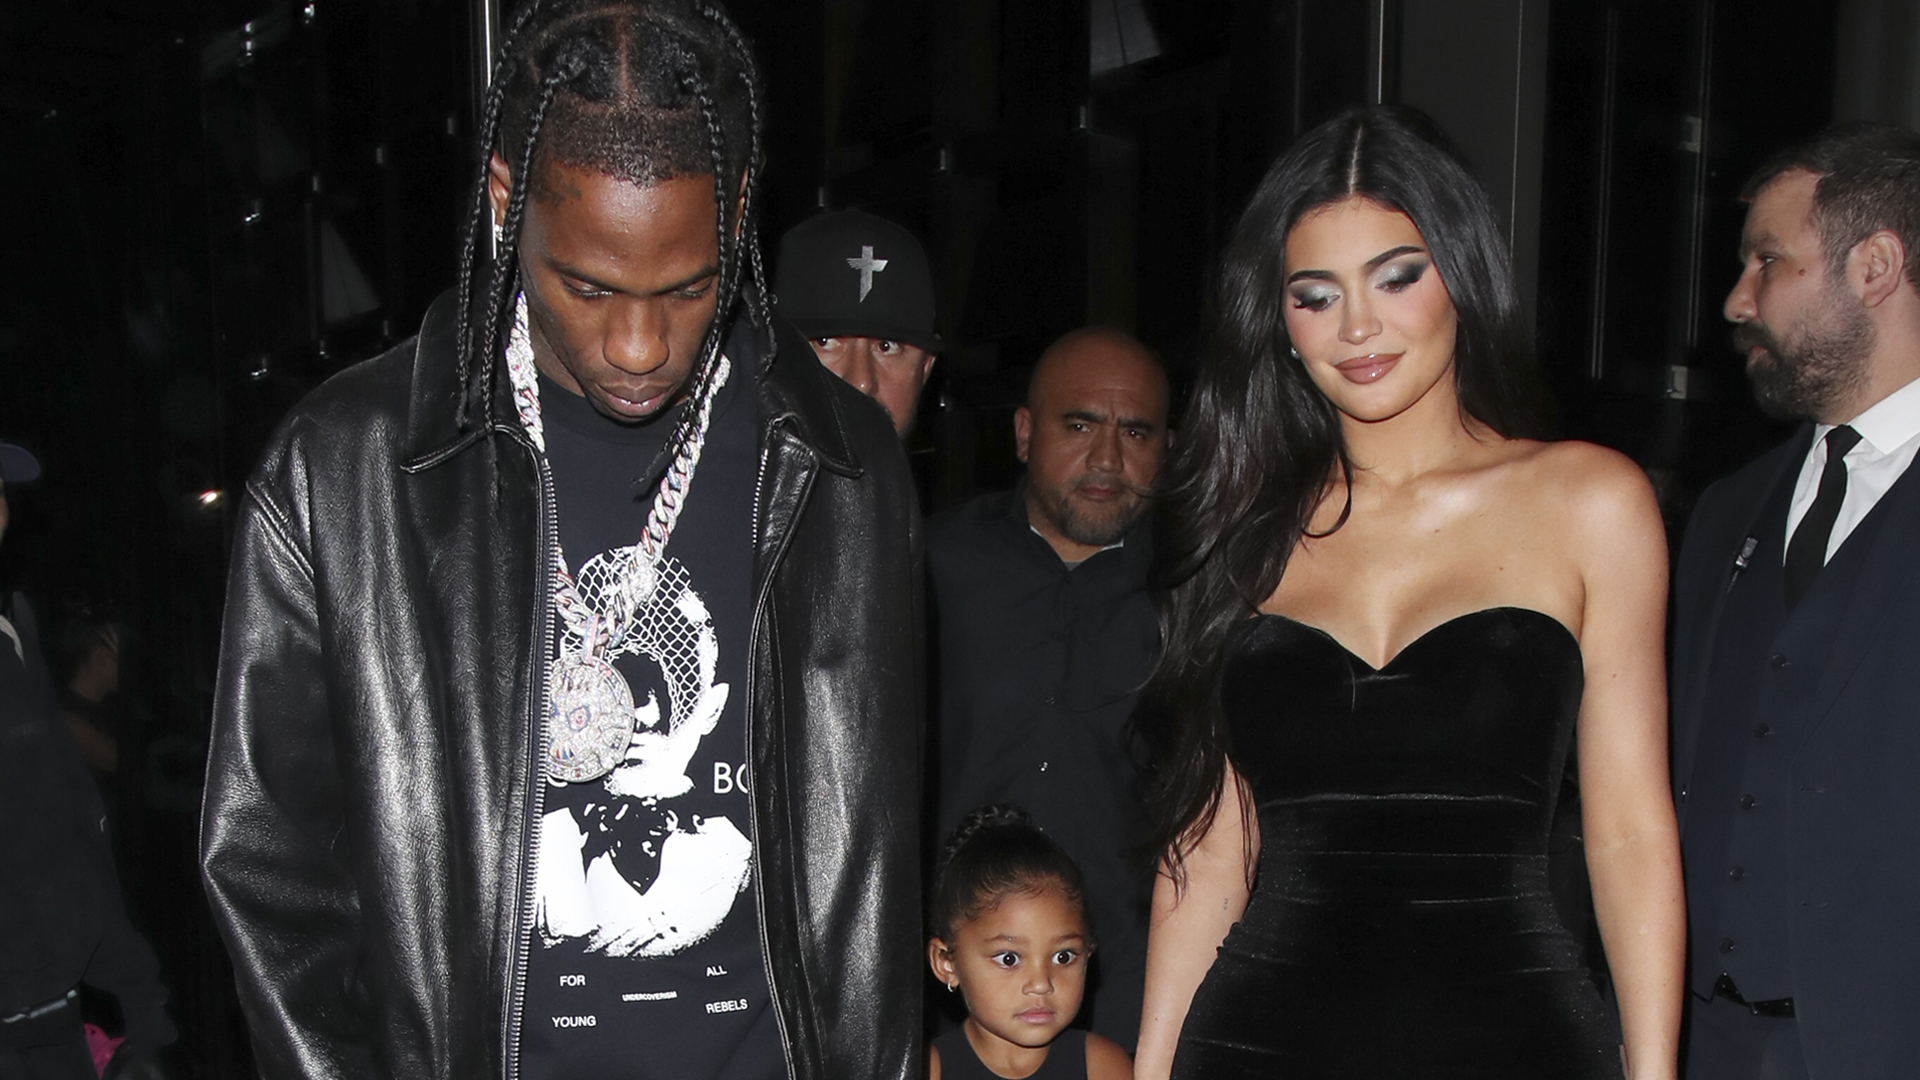 Kardashian fans share theory about why Kylie Jenner brings daughter Stormi, 4, to Travis Scott’s concerts